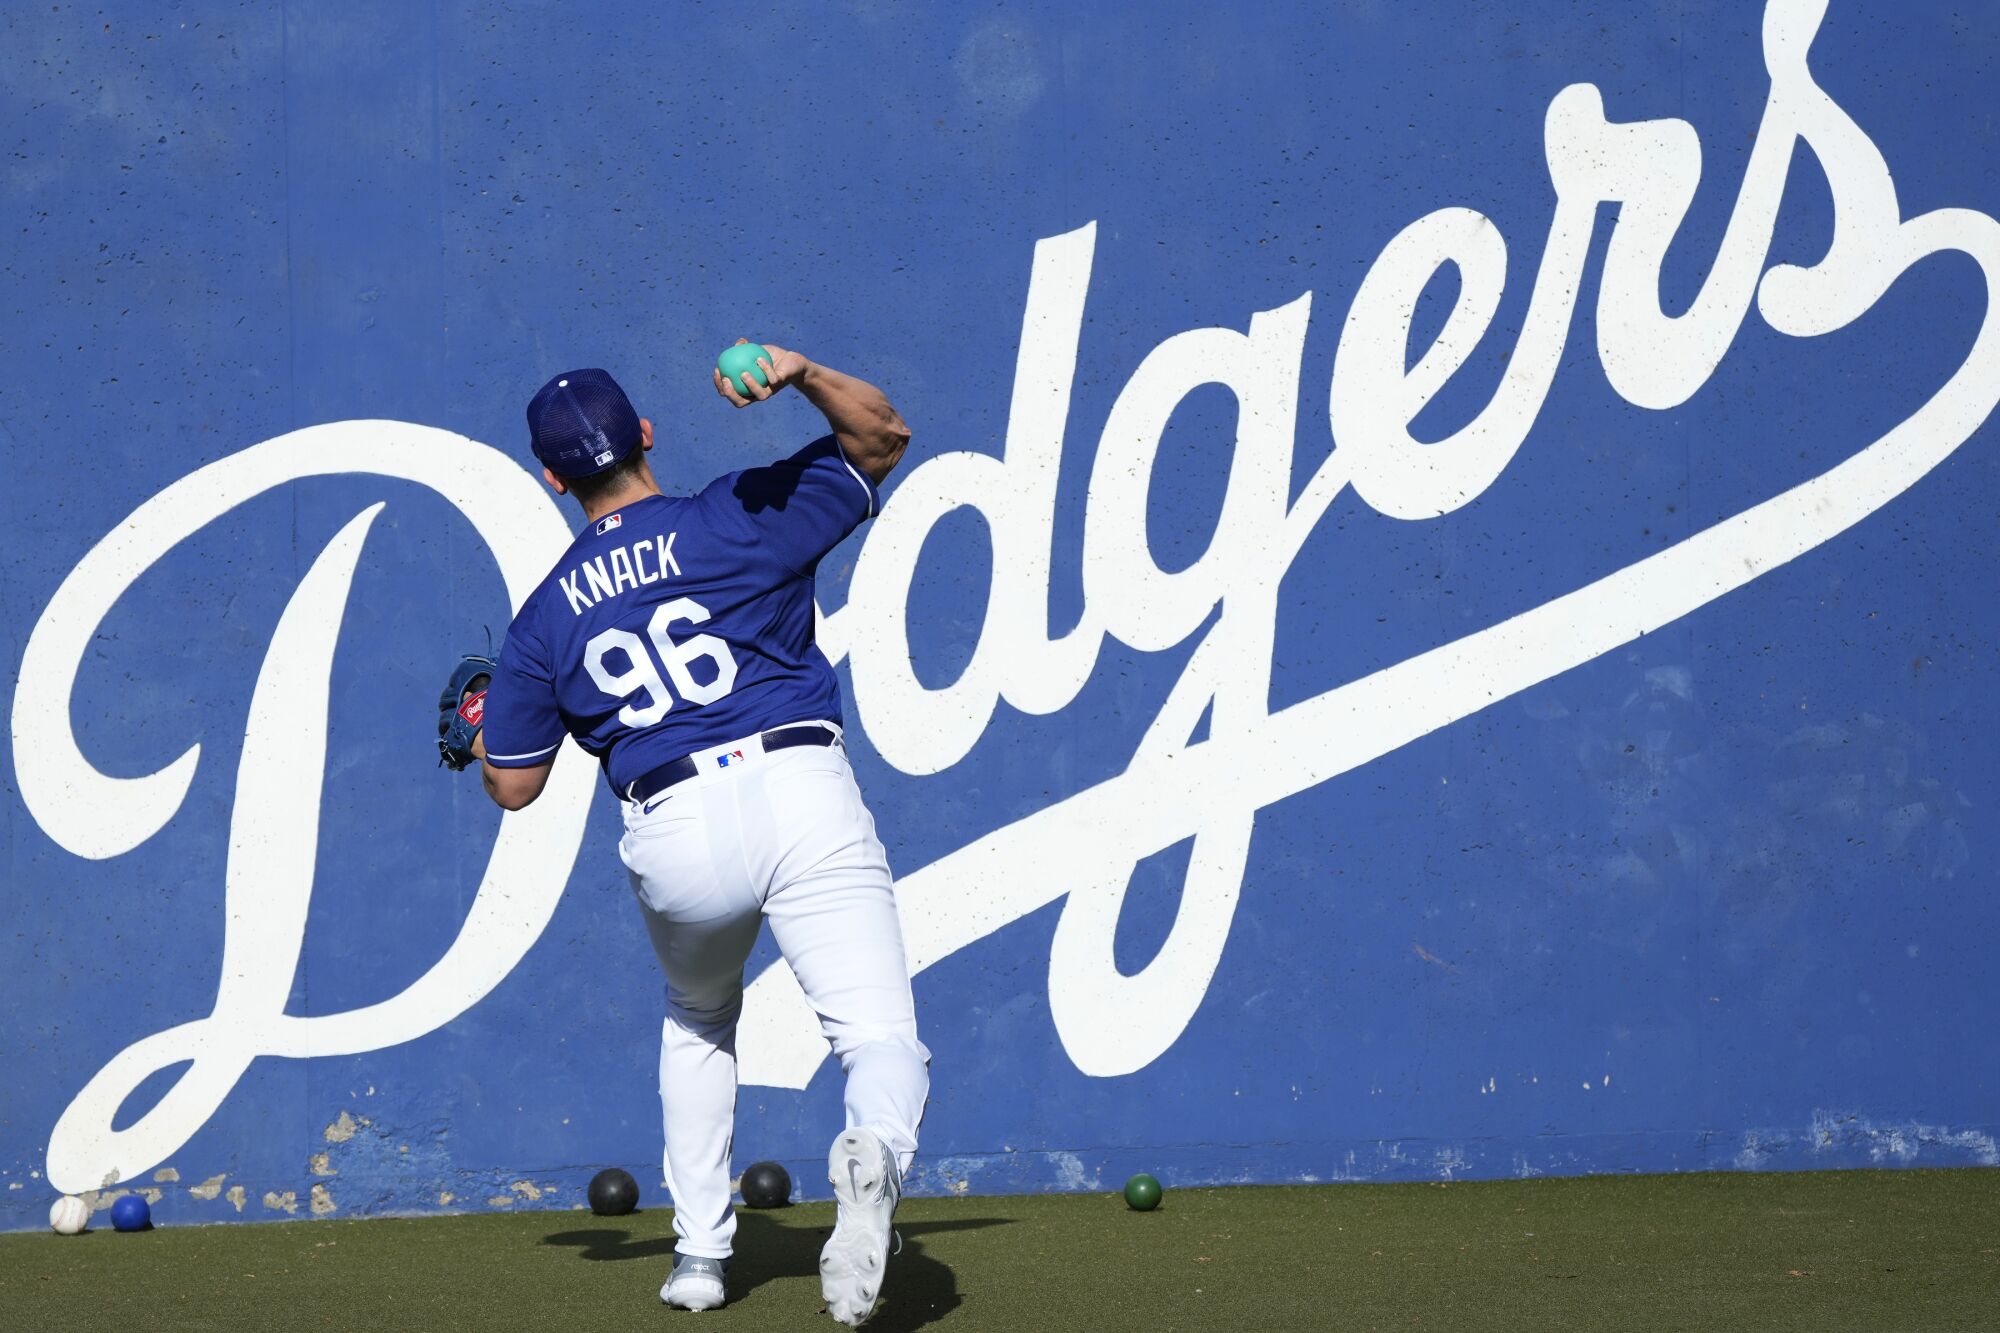 Dodgers pitcher Landon Knack warms up during spring training workouts in Phoenix on Feb. 20, 2023.